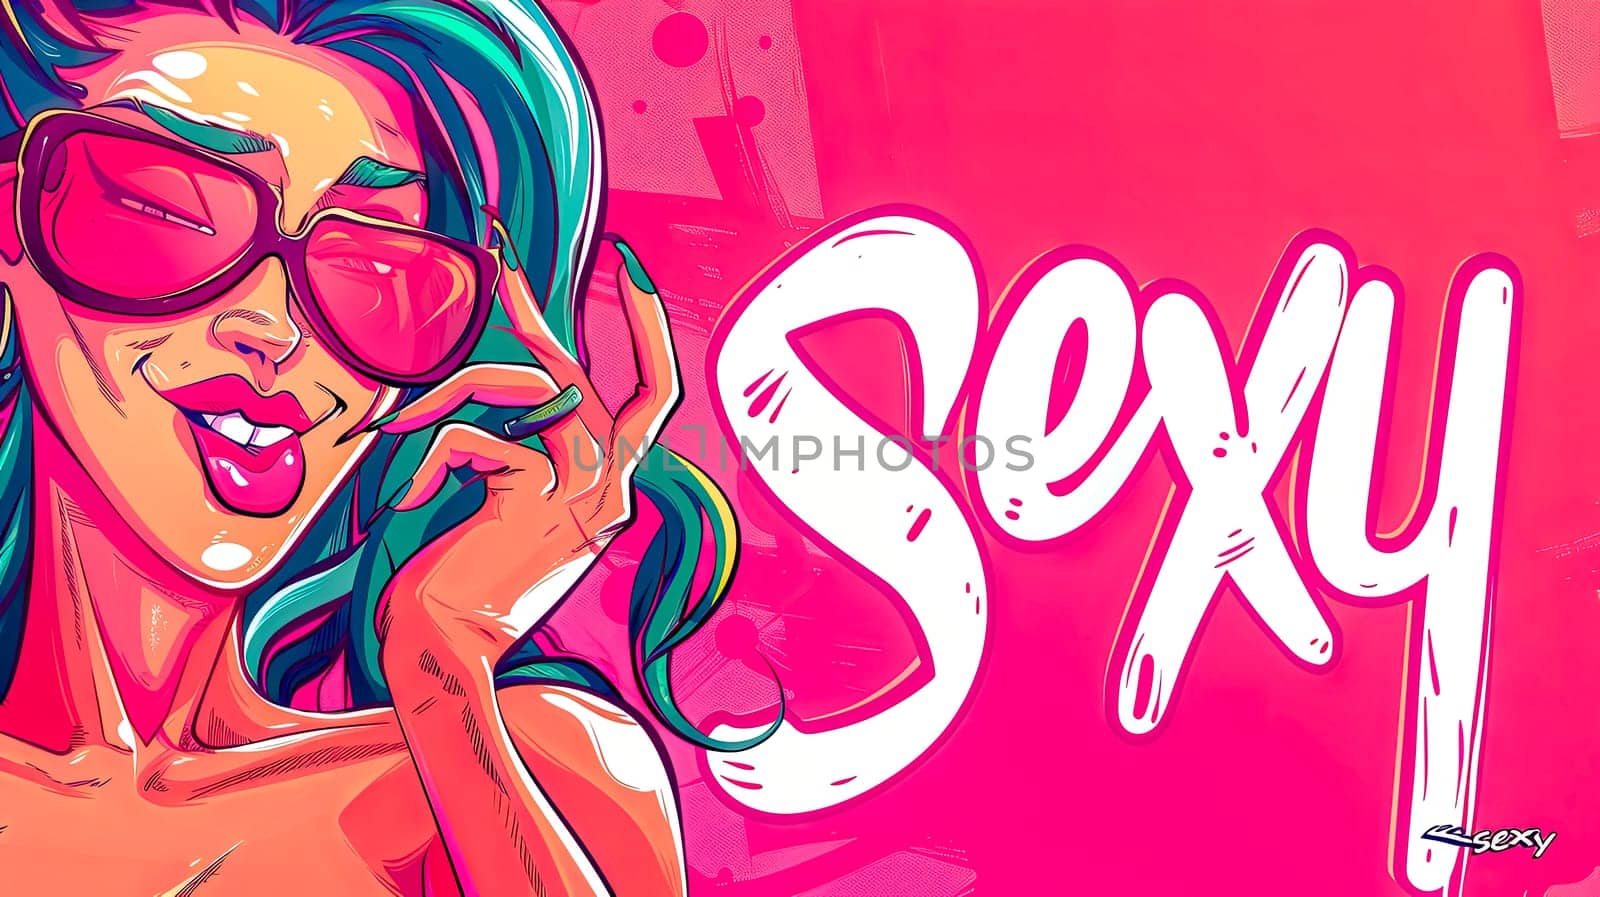 Colorful pop art illustration of a woman with sunglasses next to the word sexy